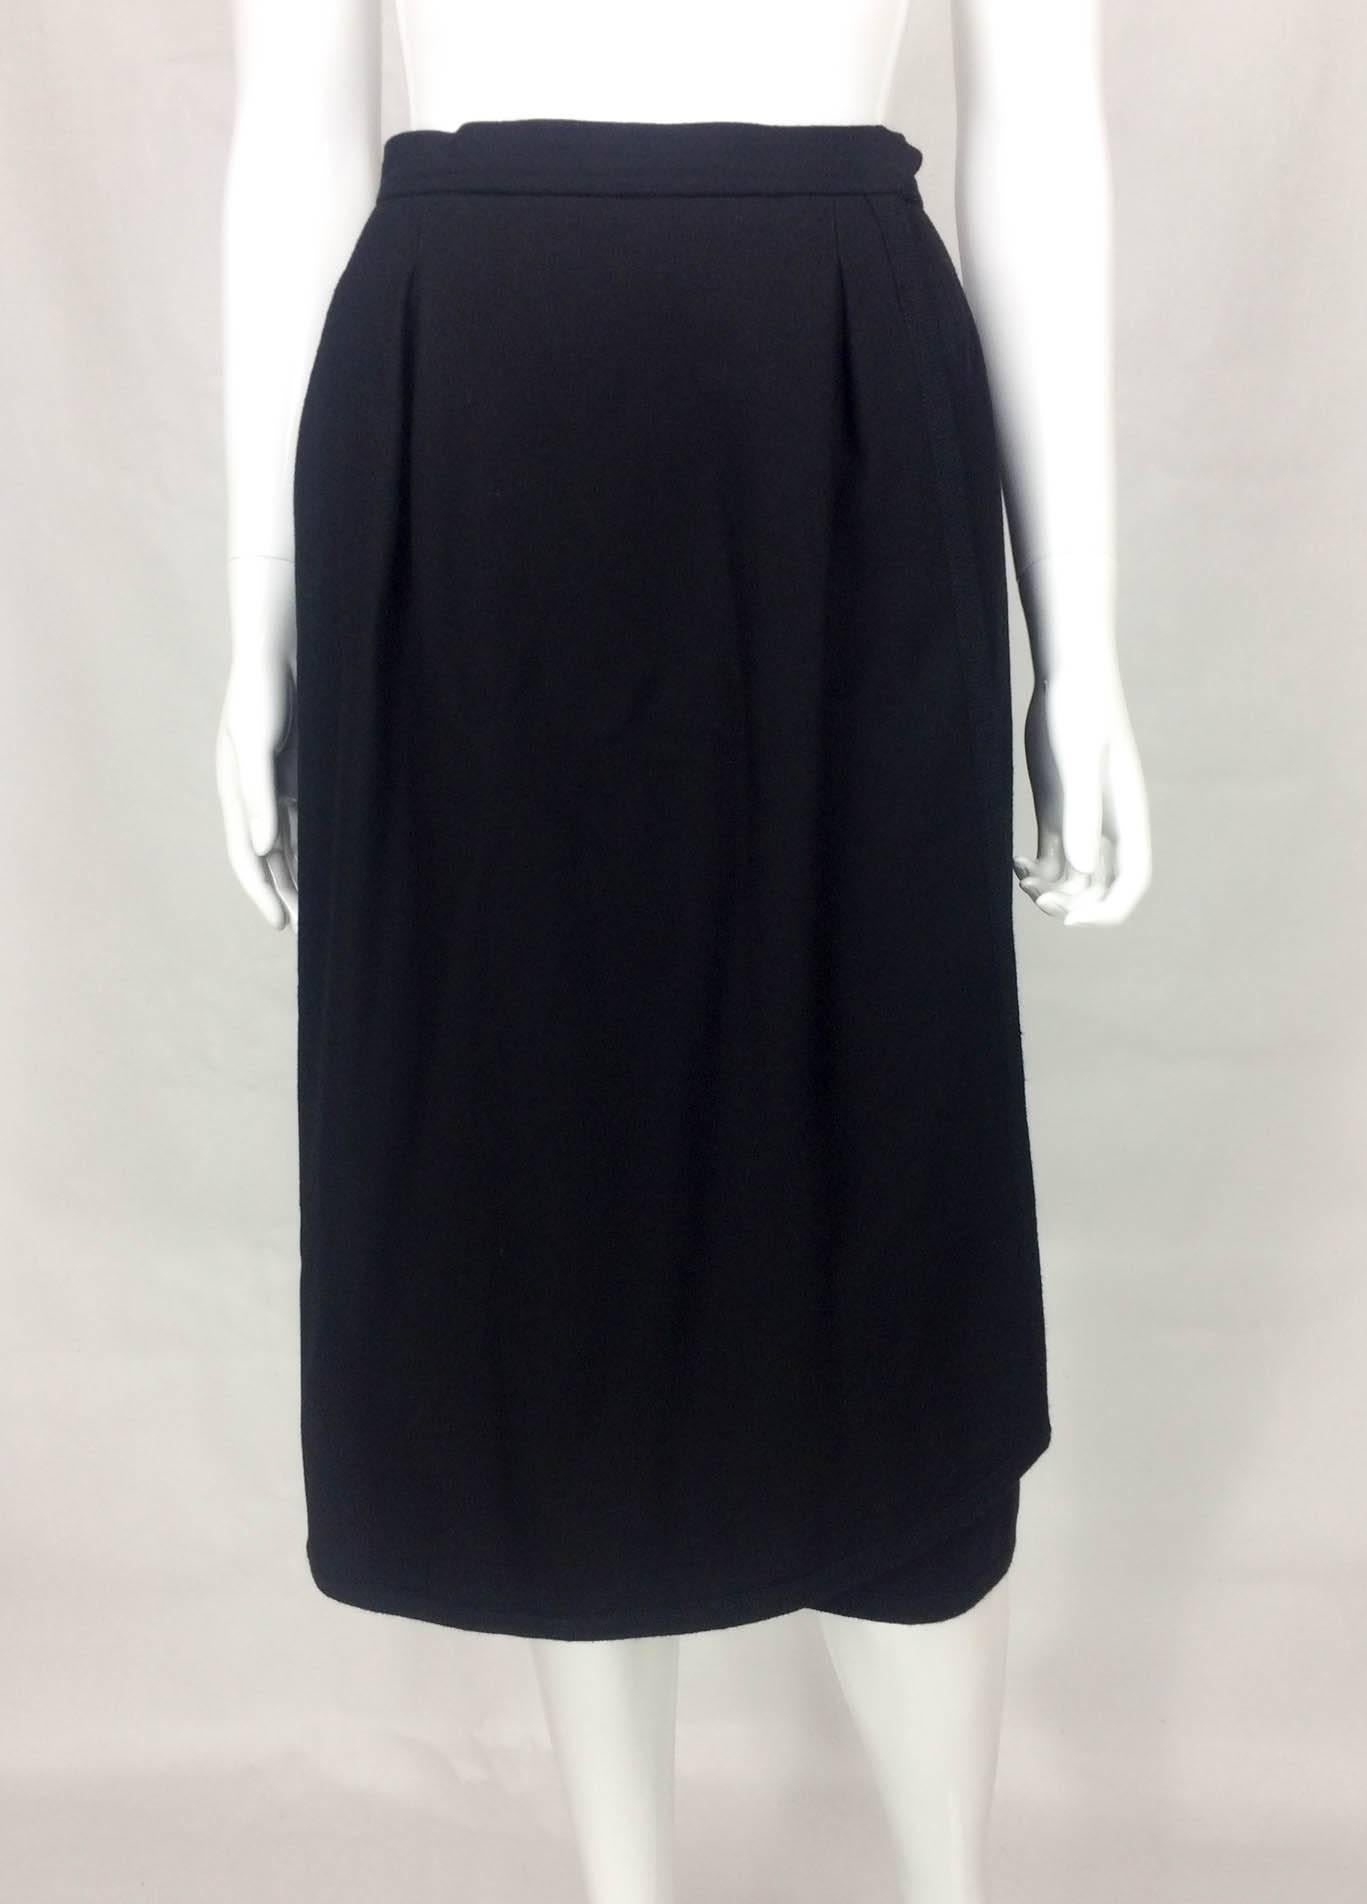 Yves Saint Laurent Black Wool Wrap Midi Skirt - 1980s In Excellent Condition In London, Chelsea